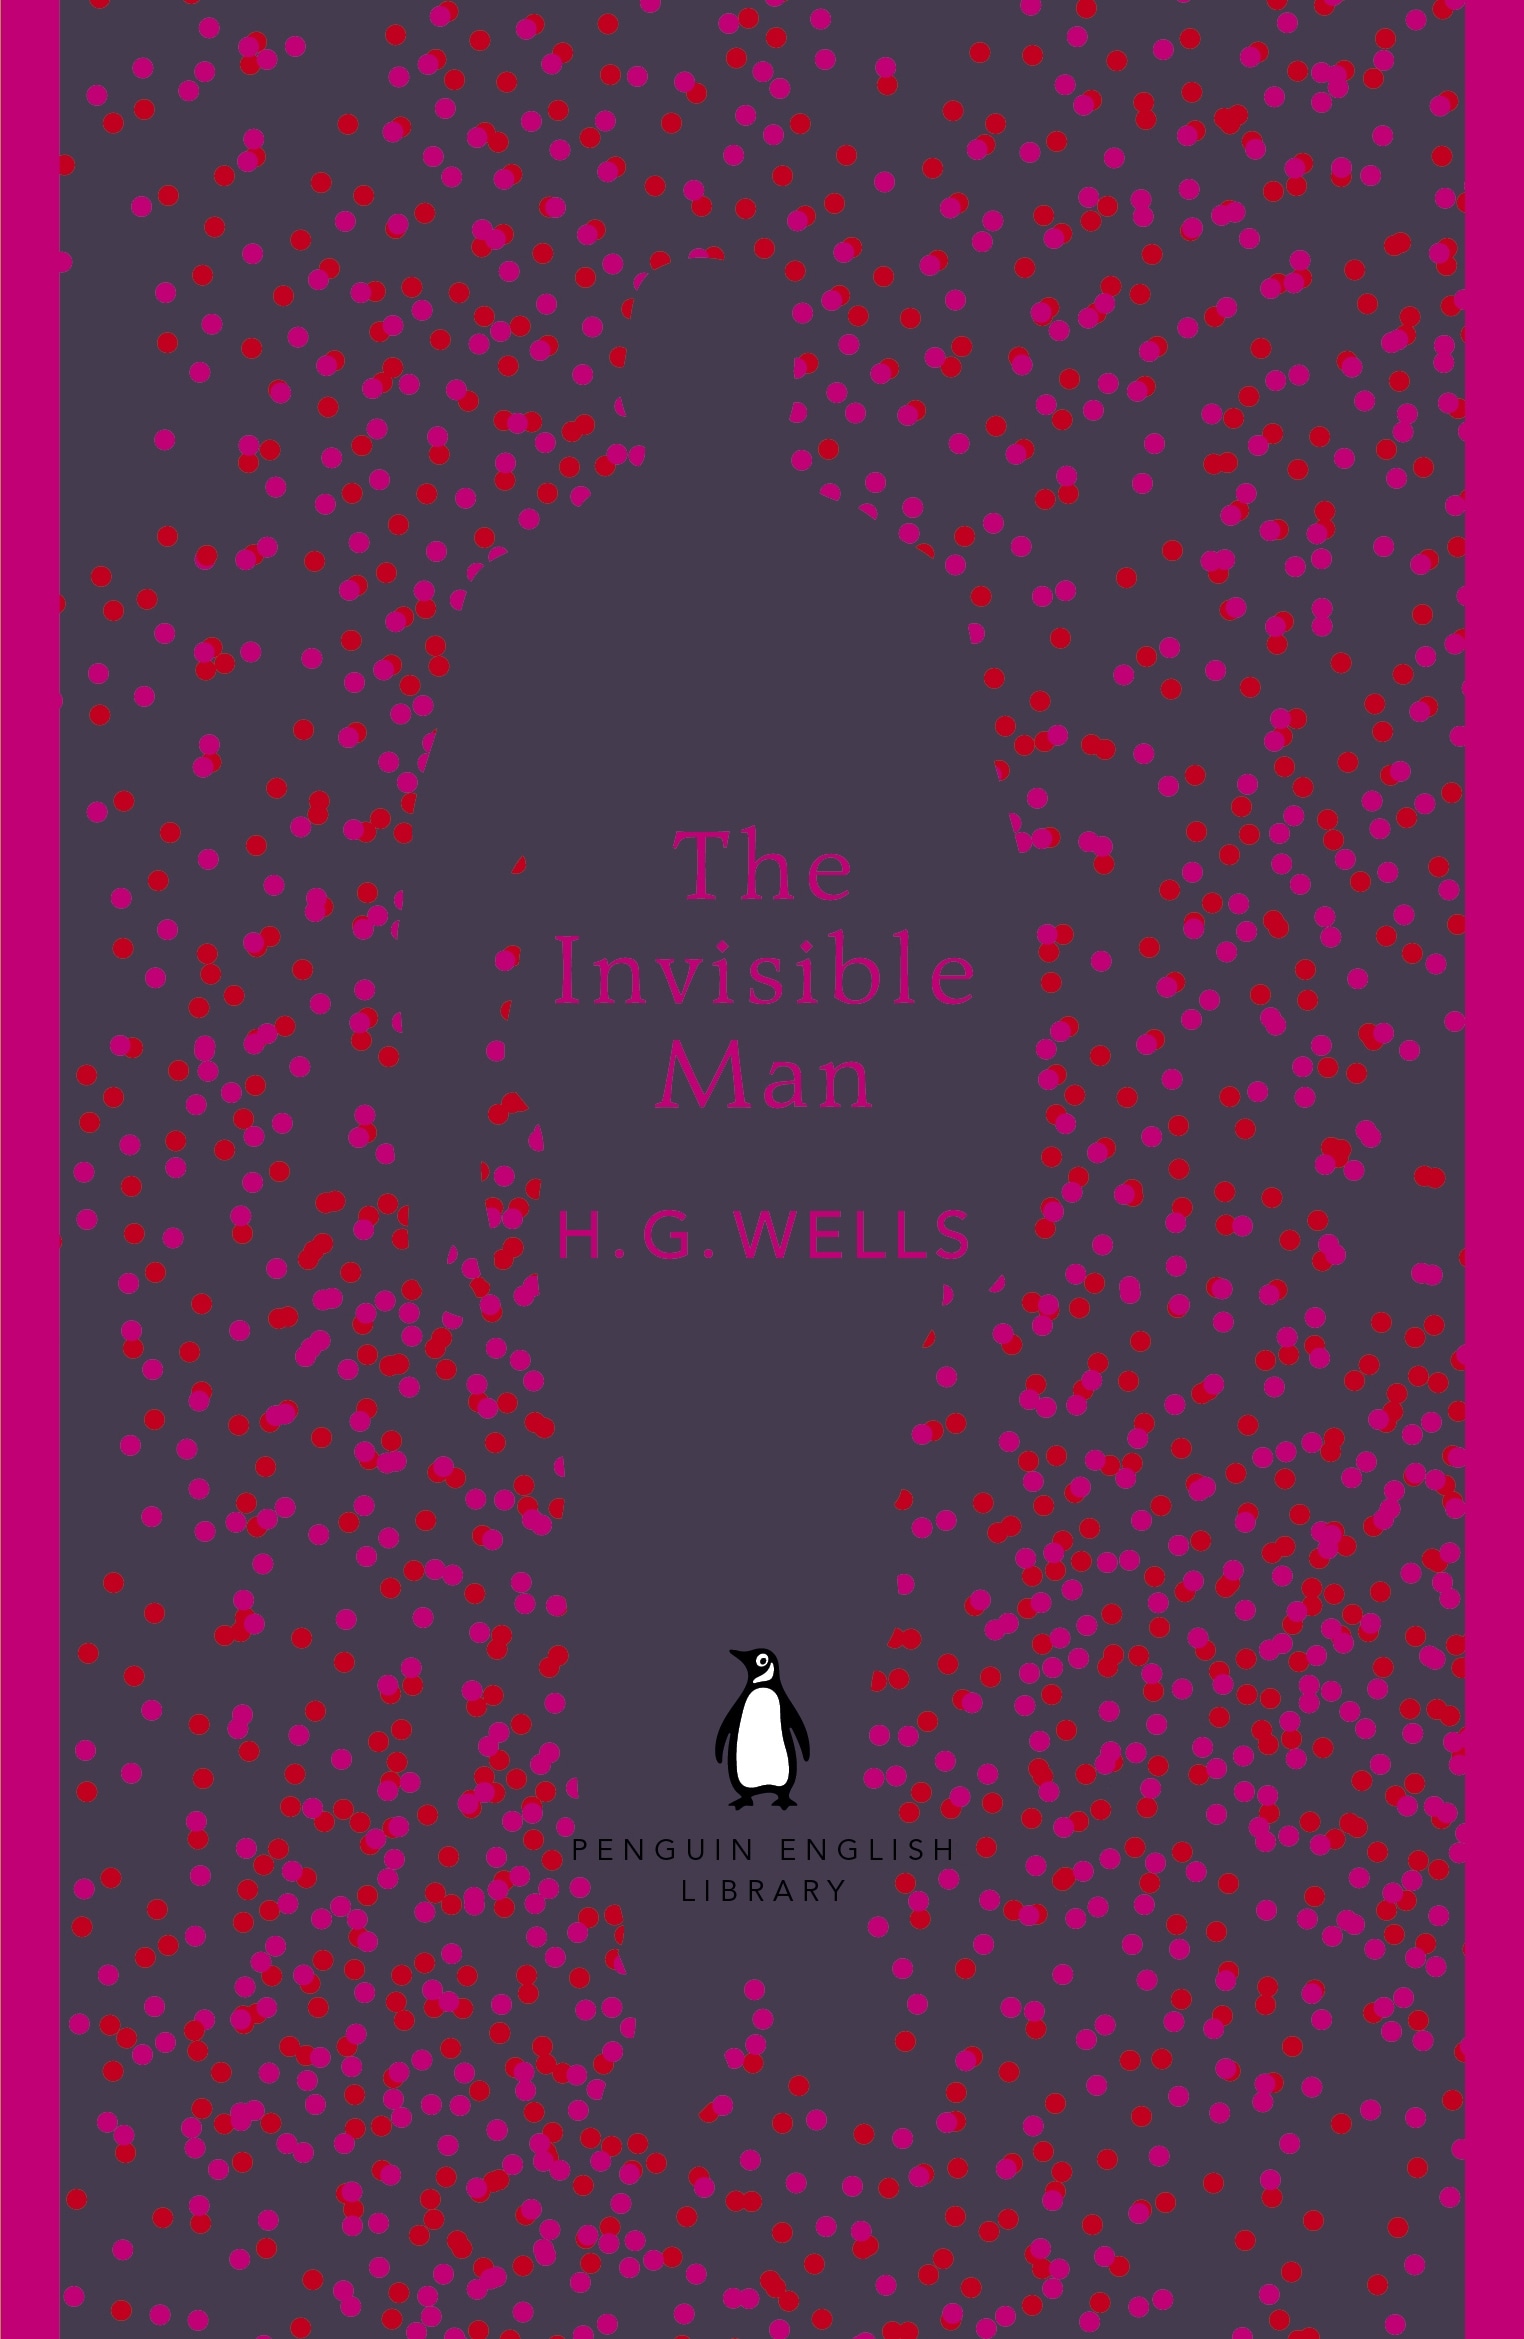 Book “The Invisible Man” by H G Wells — November 29, 2012